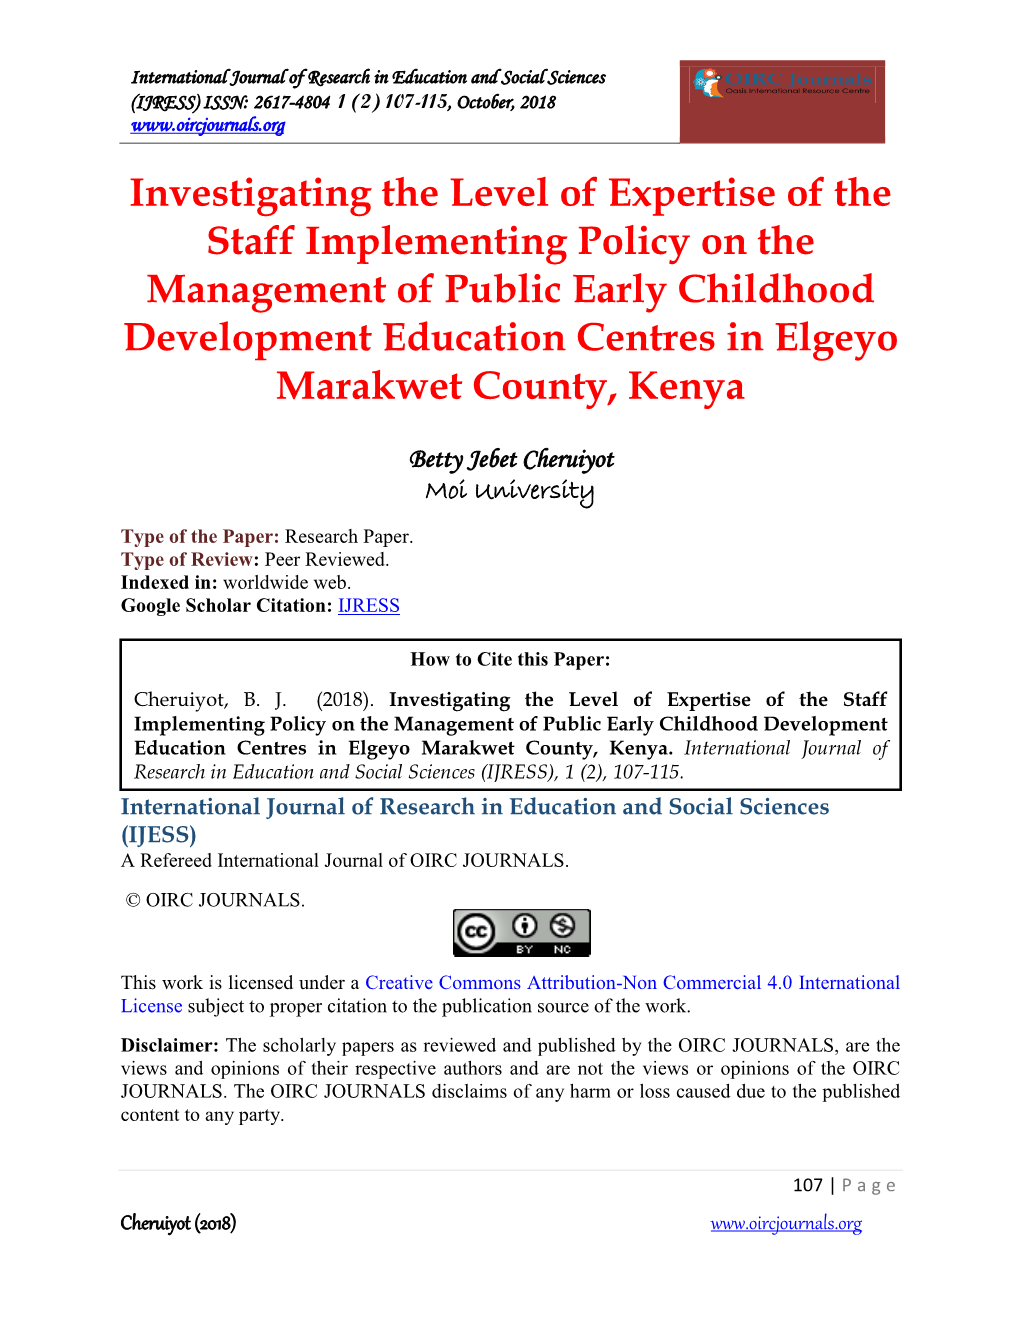 Investigating the Level of Expertise of the Staff Implementing Policy on The